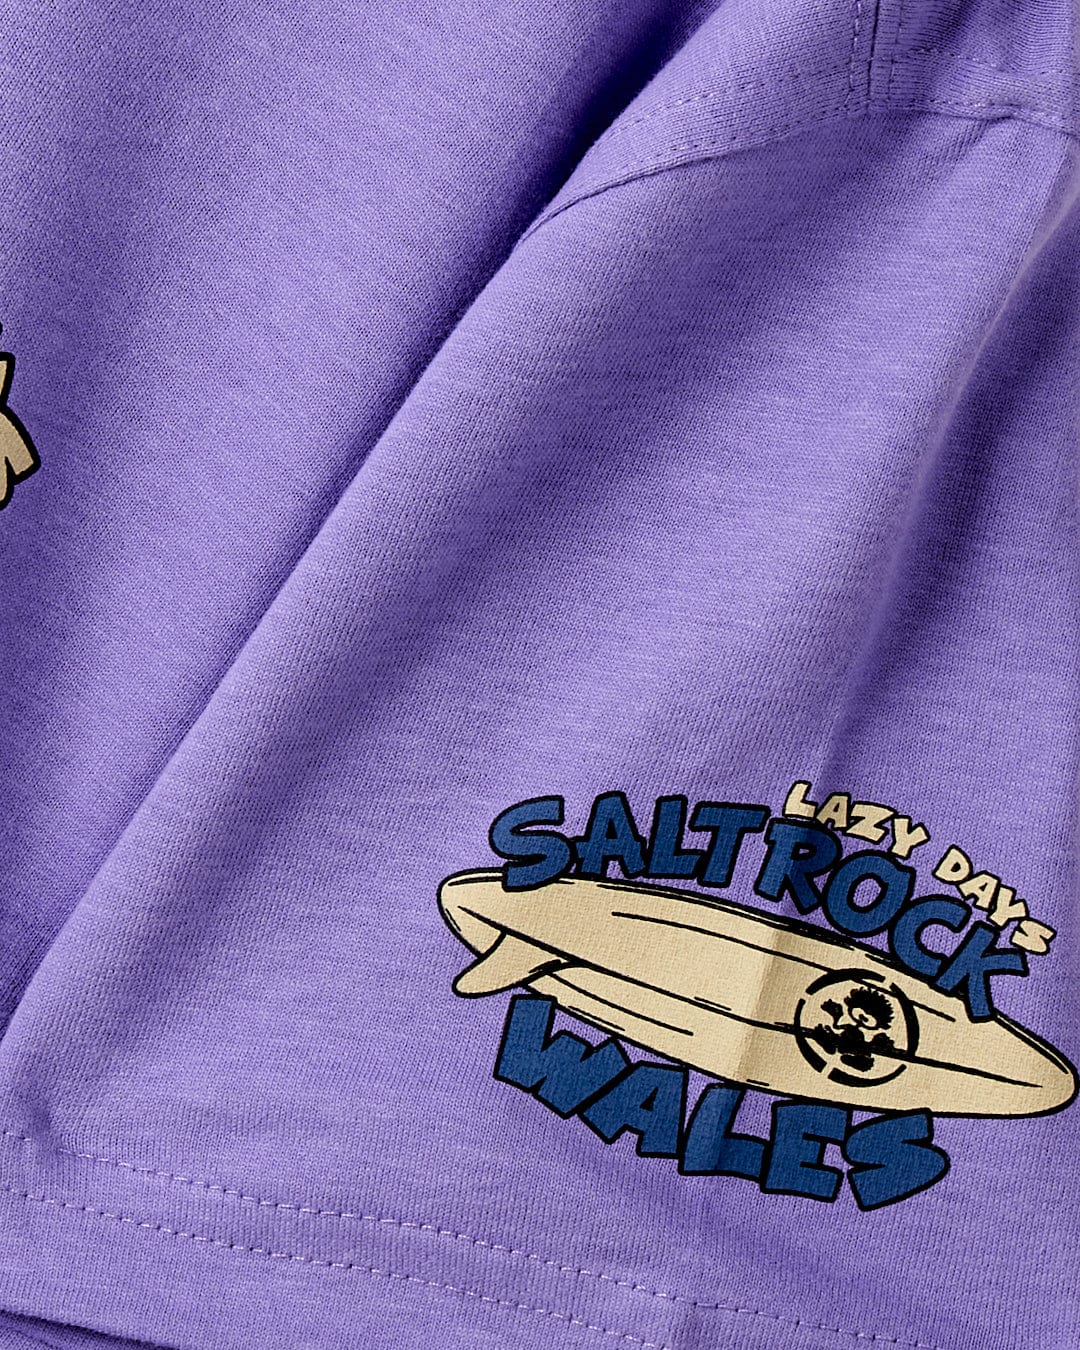 Close-up of a purple cotton material with a "Saltrock" logo patch featuring surfing graphics on the Lazy Location Wales - Kids T-Shirt - Purple.